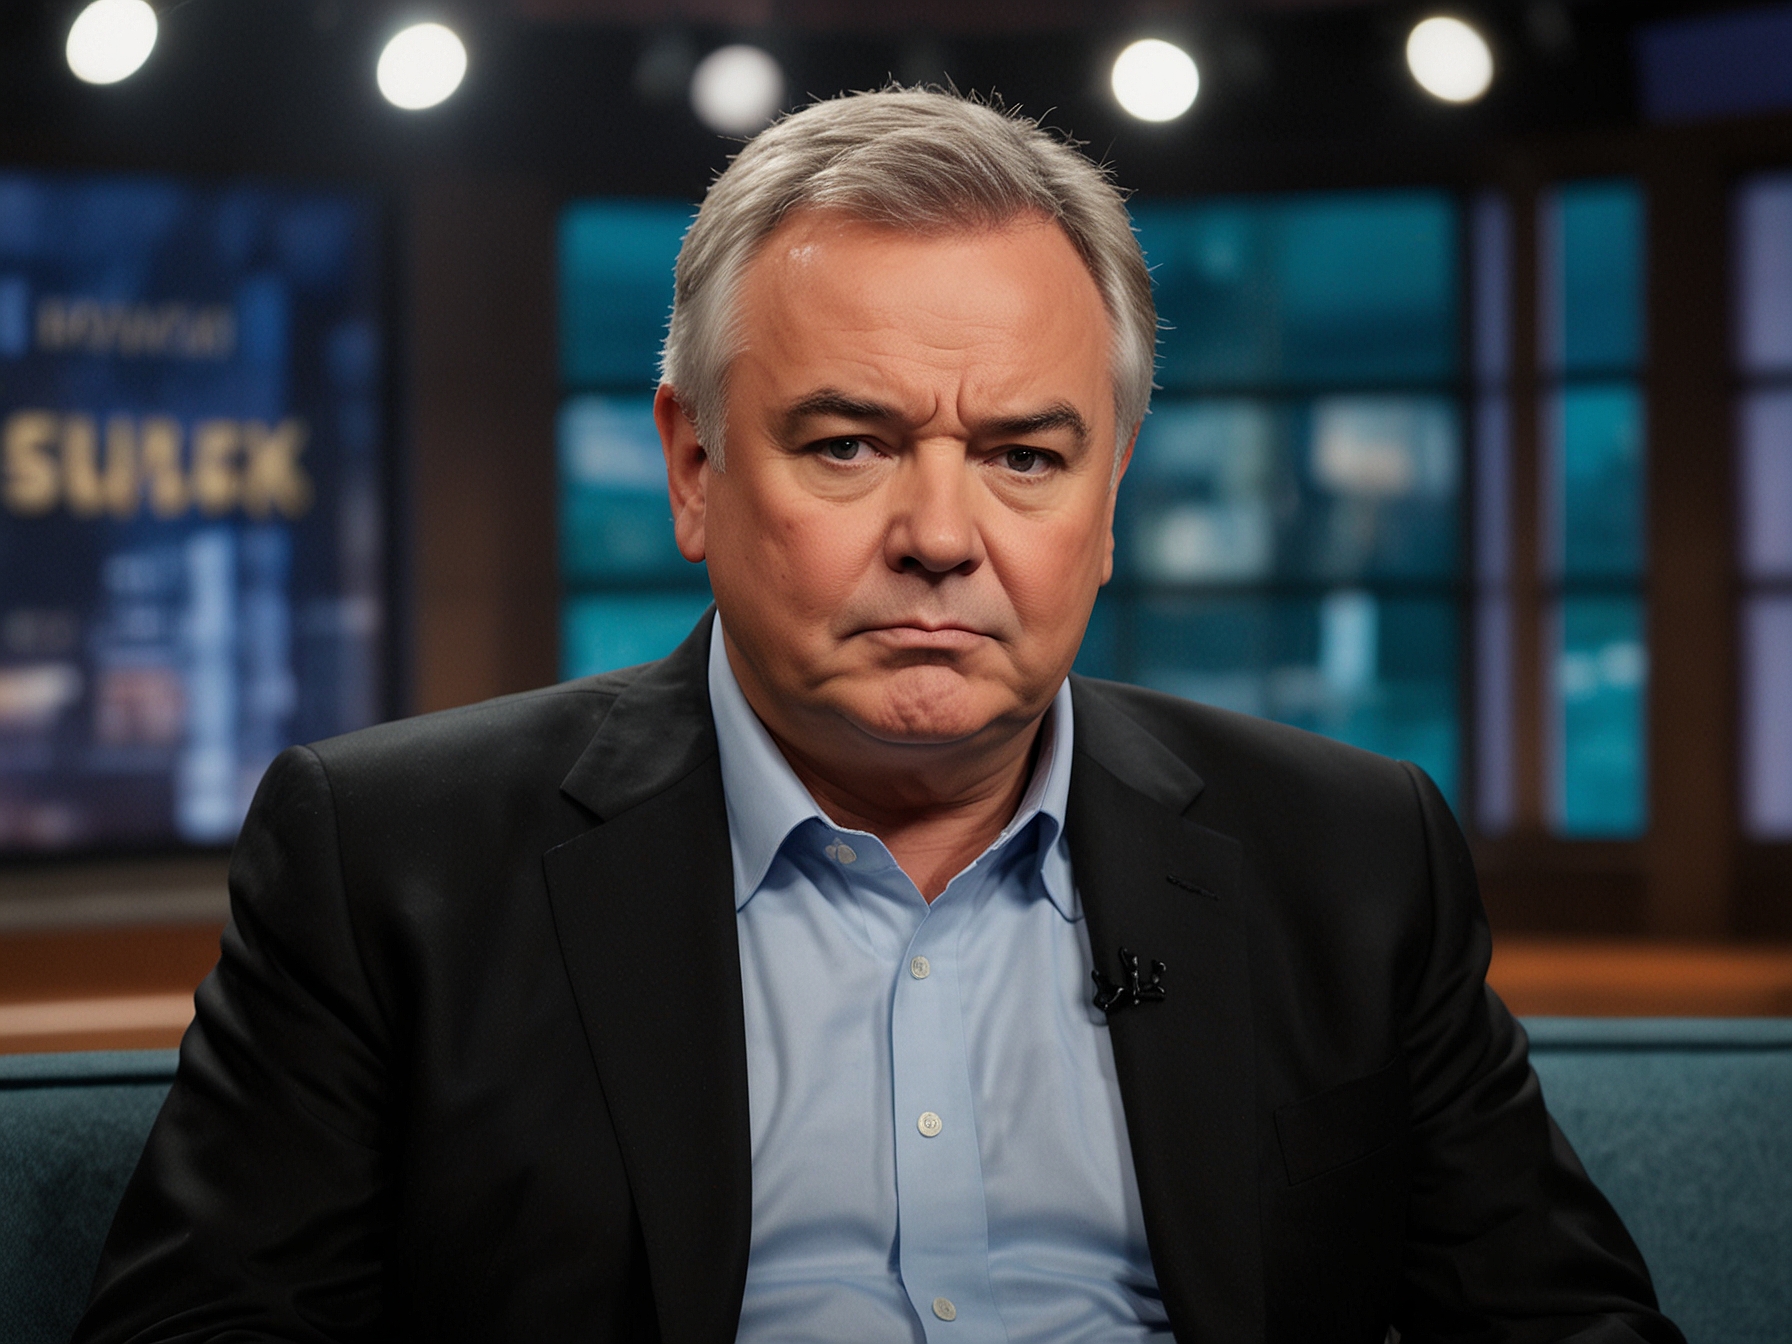 Eamonn Holmes, the seasoned television presenter, appears contemplative on the set of a talk show, symbolizing his reflective state amid personal challenges and a potential career shift.